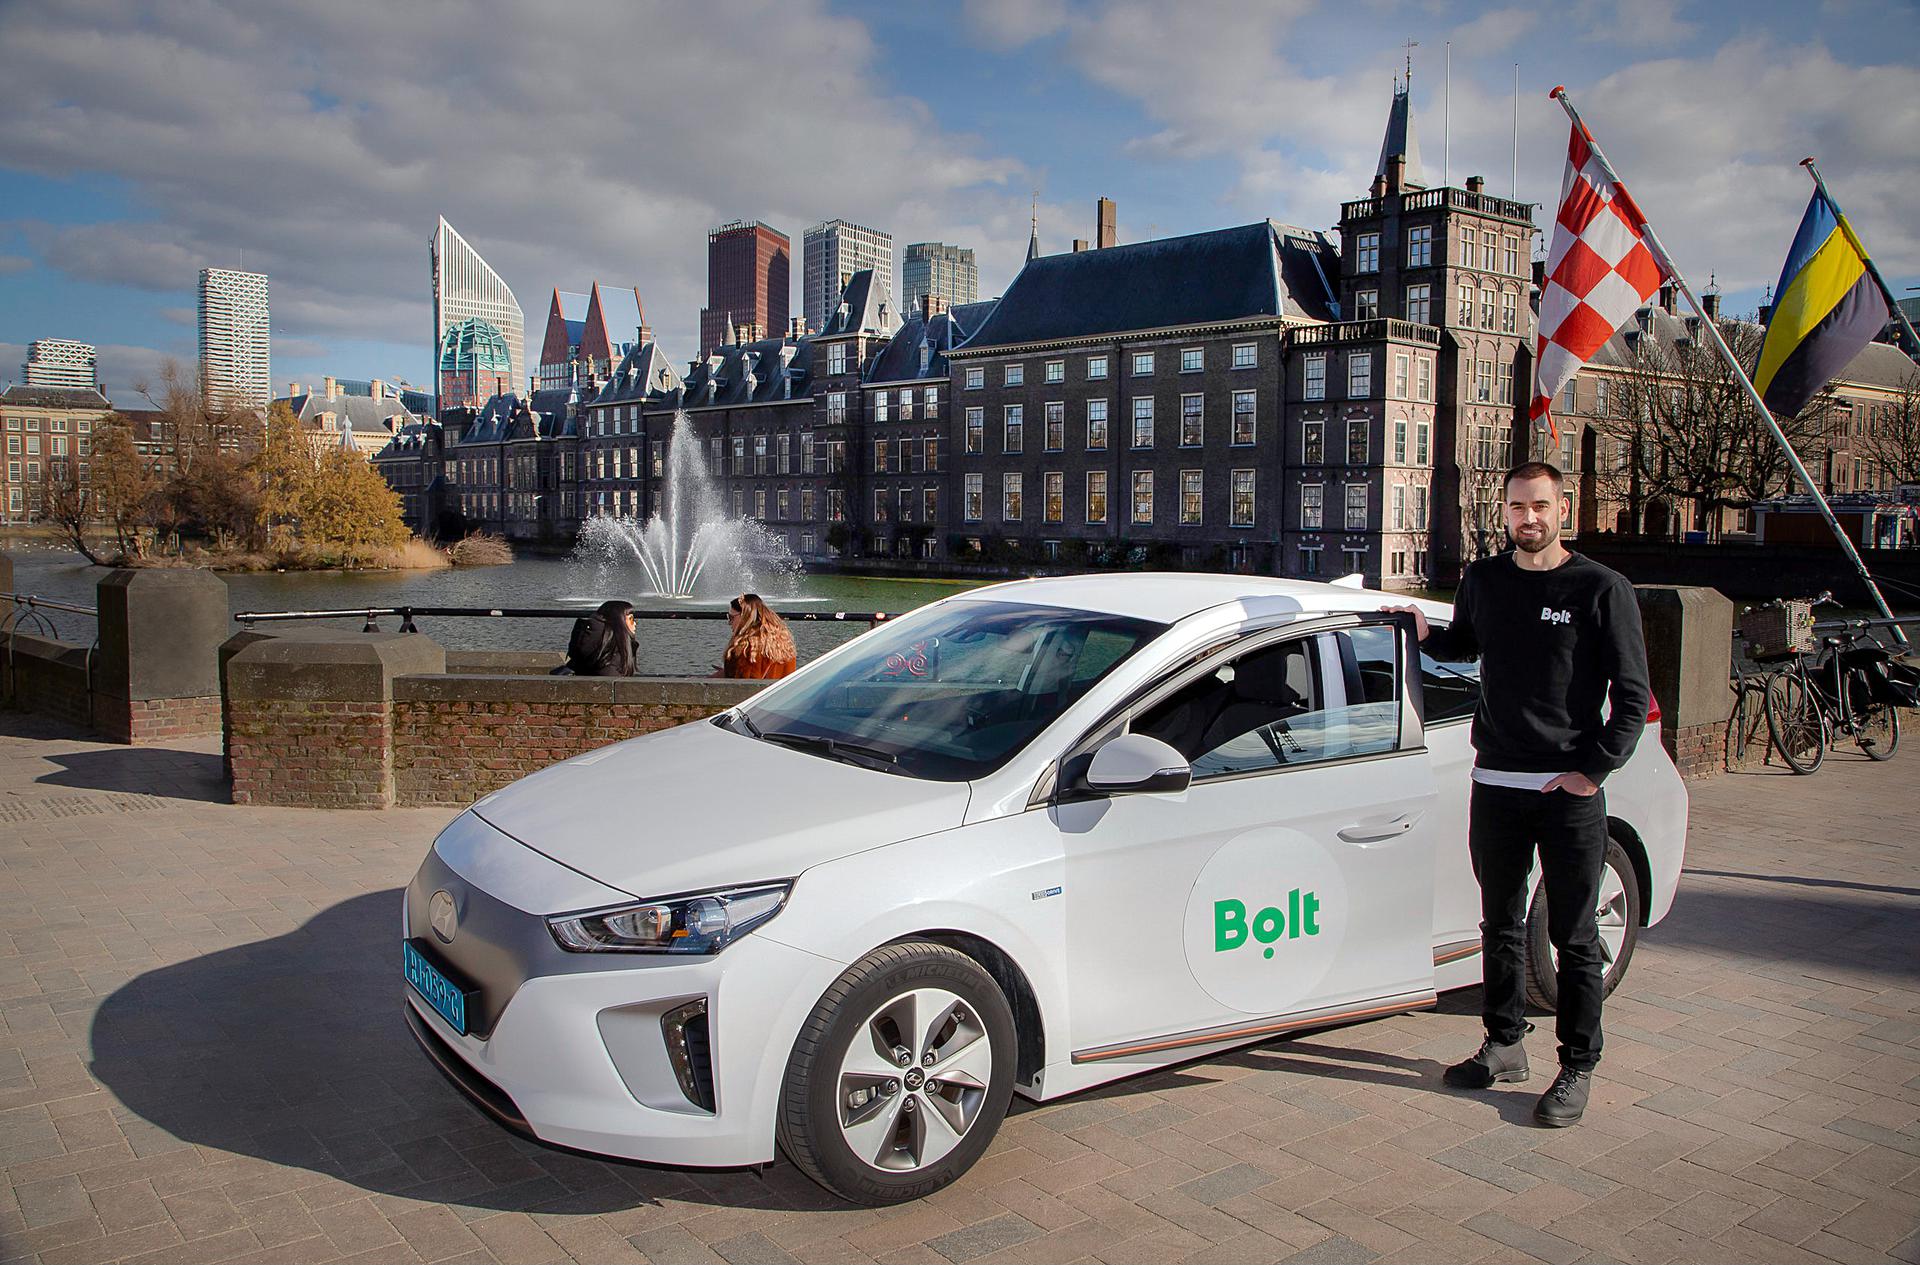 Uber competitor Bolt is now also active in The Hague